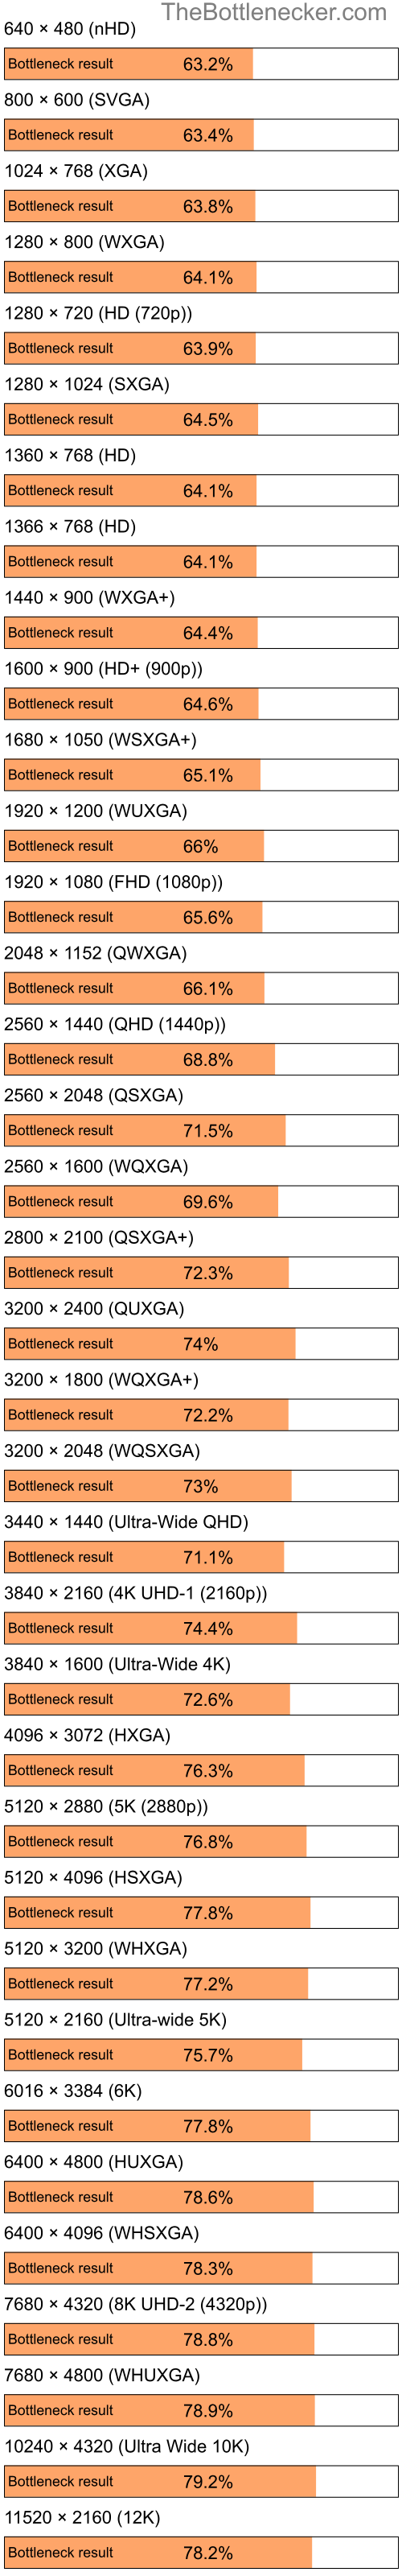 Bottleneck results by resolution for Intel Atom Z520 and AMD Mobility Radeon HD 3470 in General Tasks